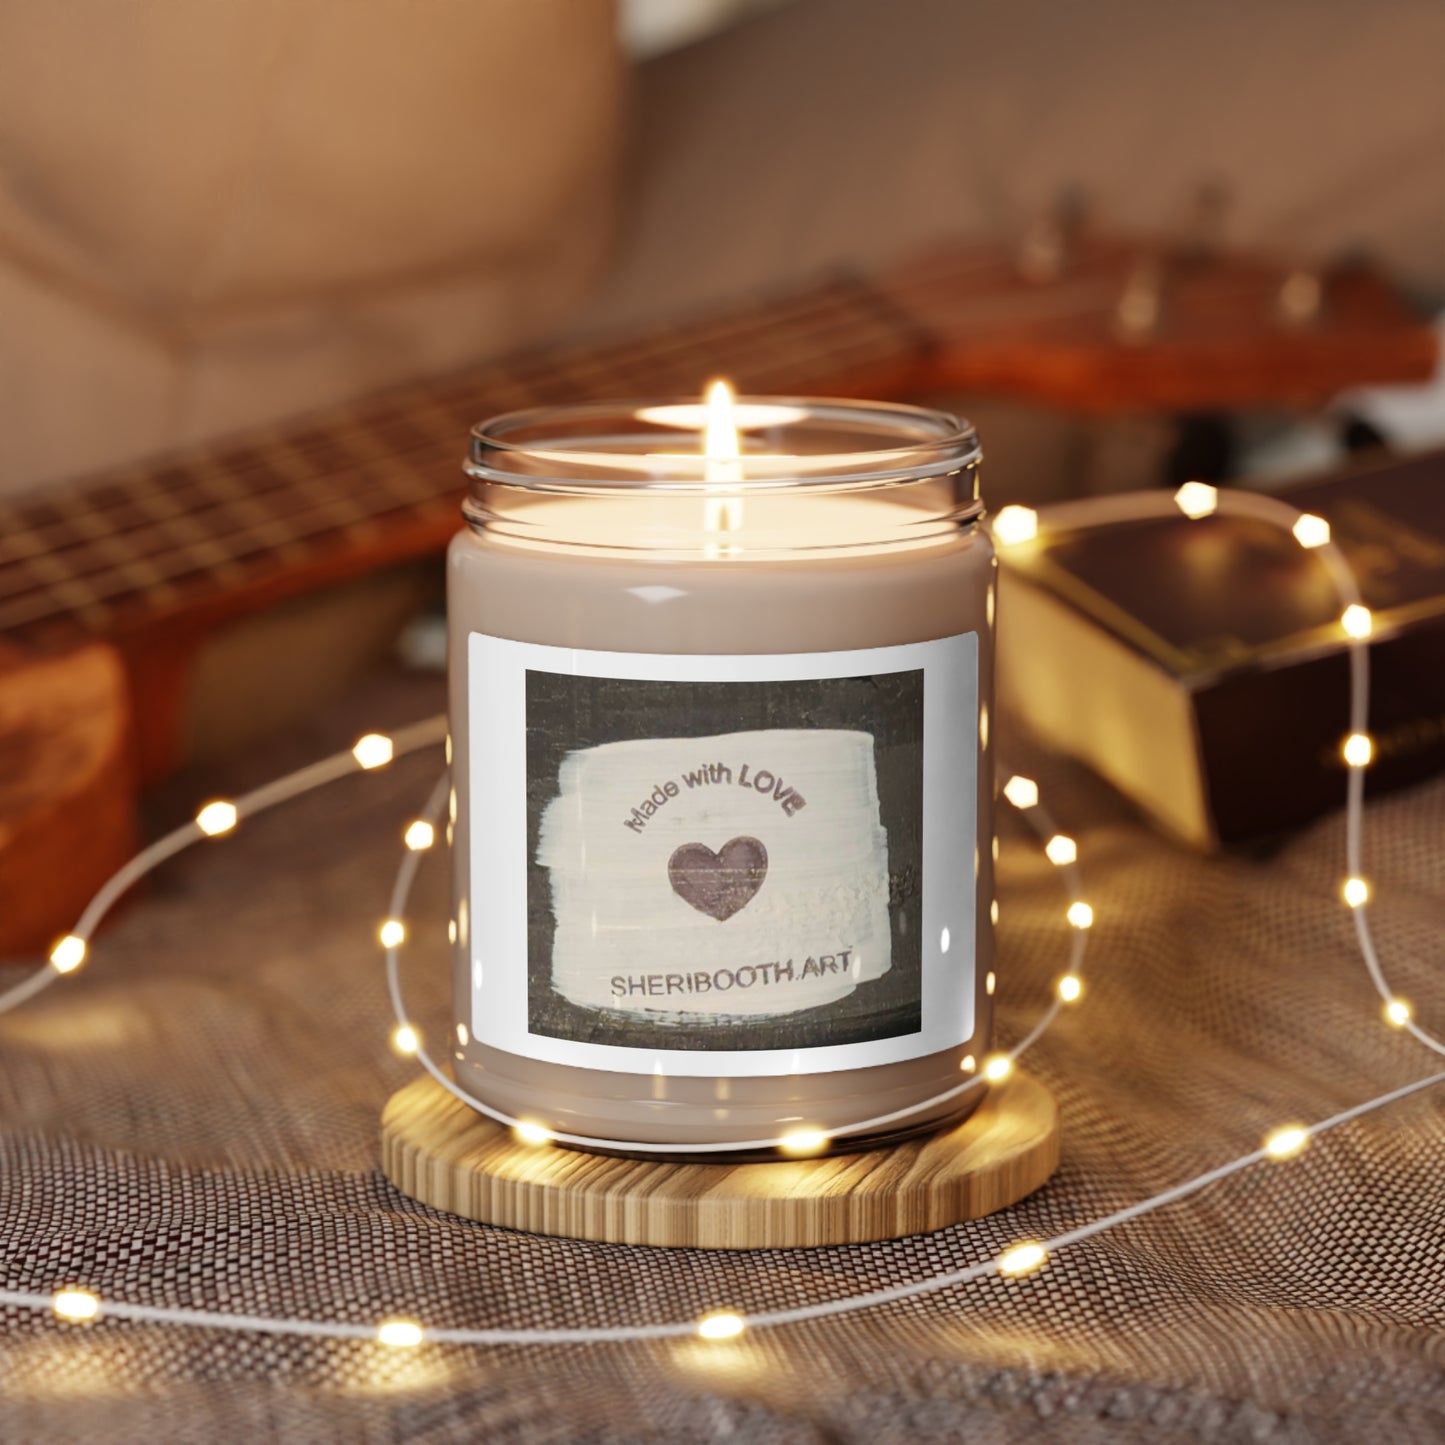 Made With Love Scented Soy Candle, 9oz